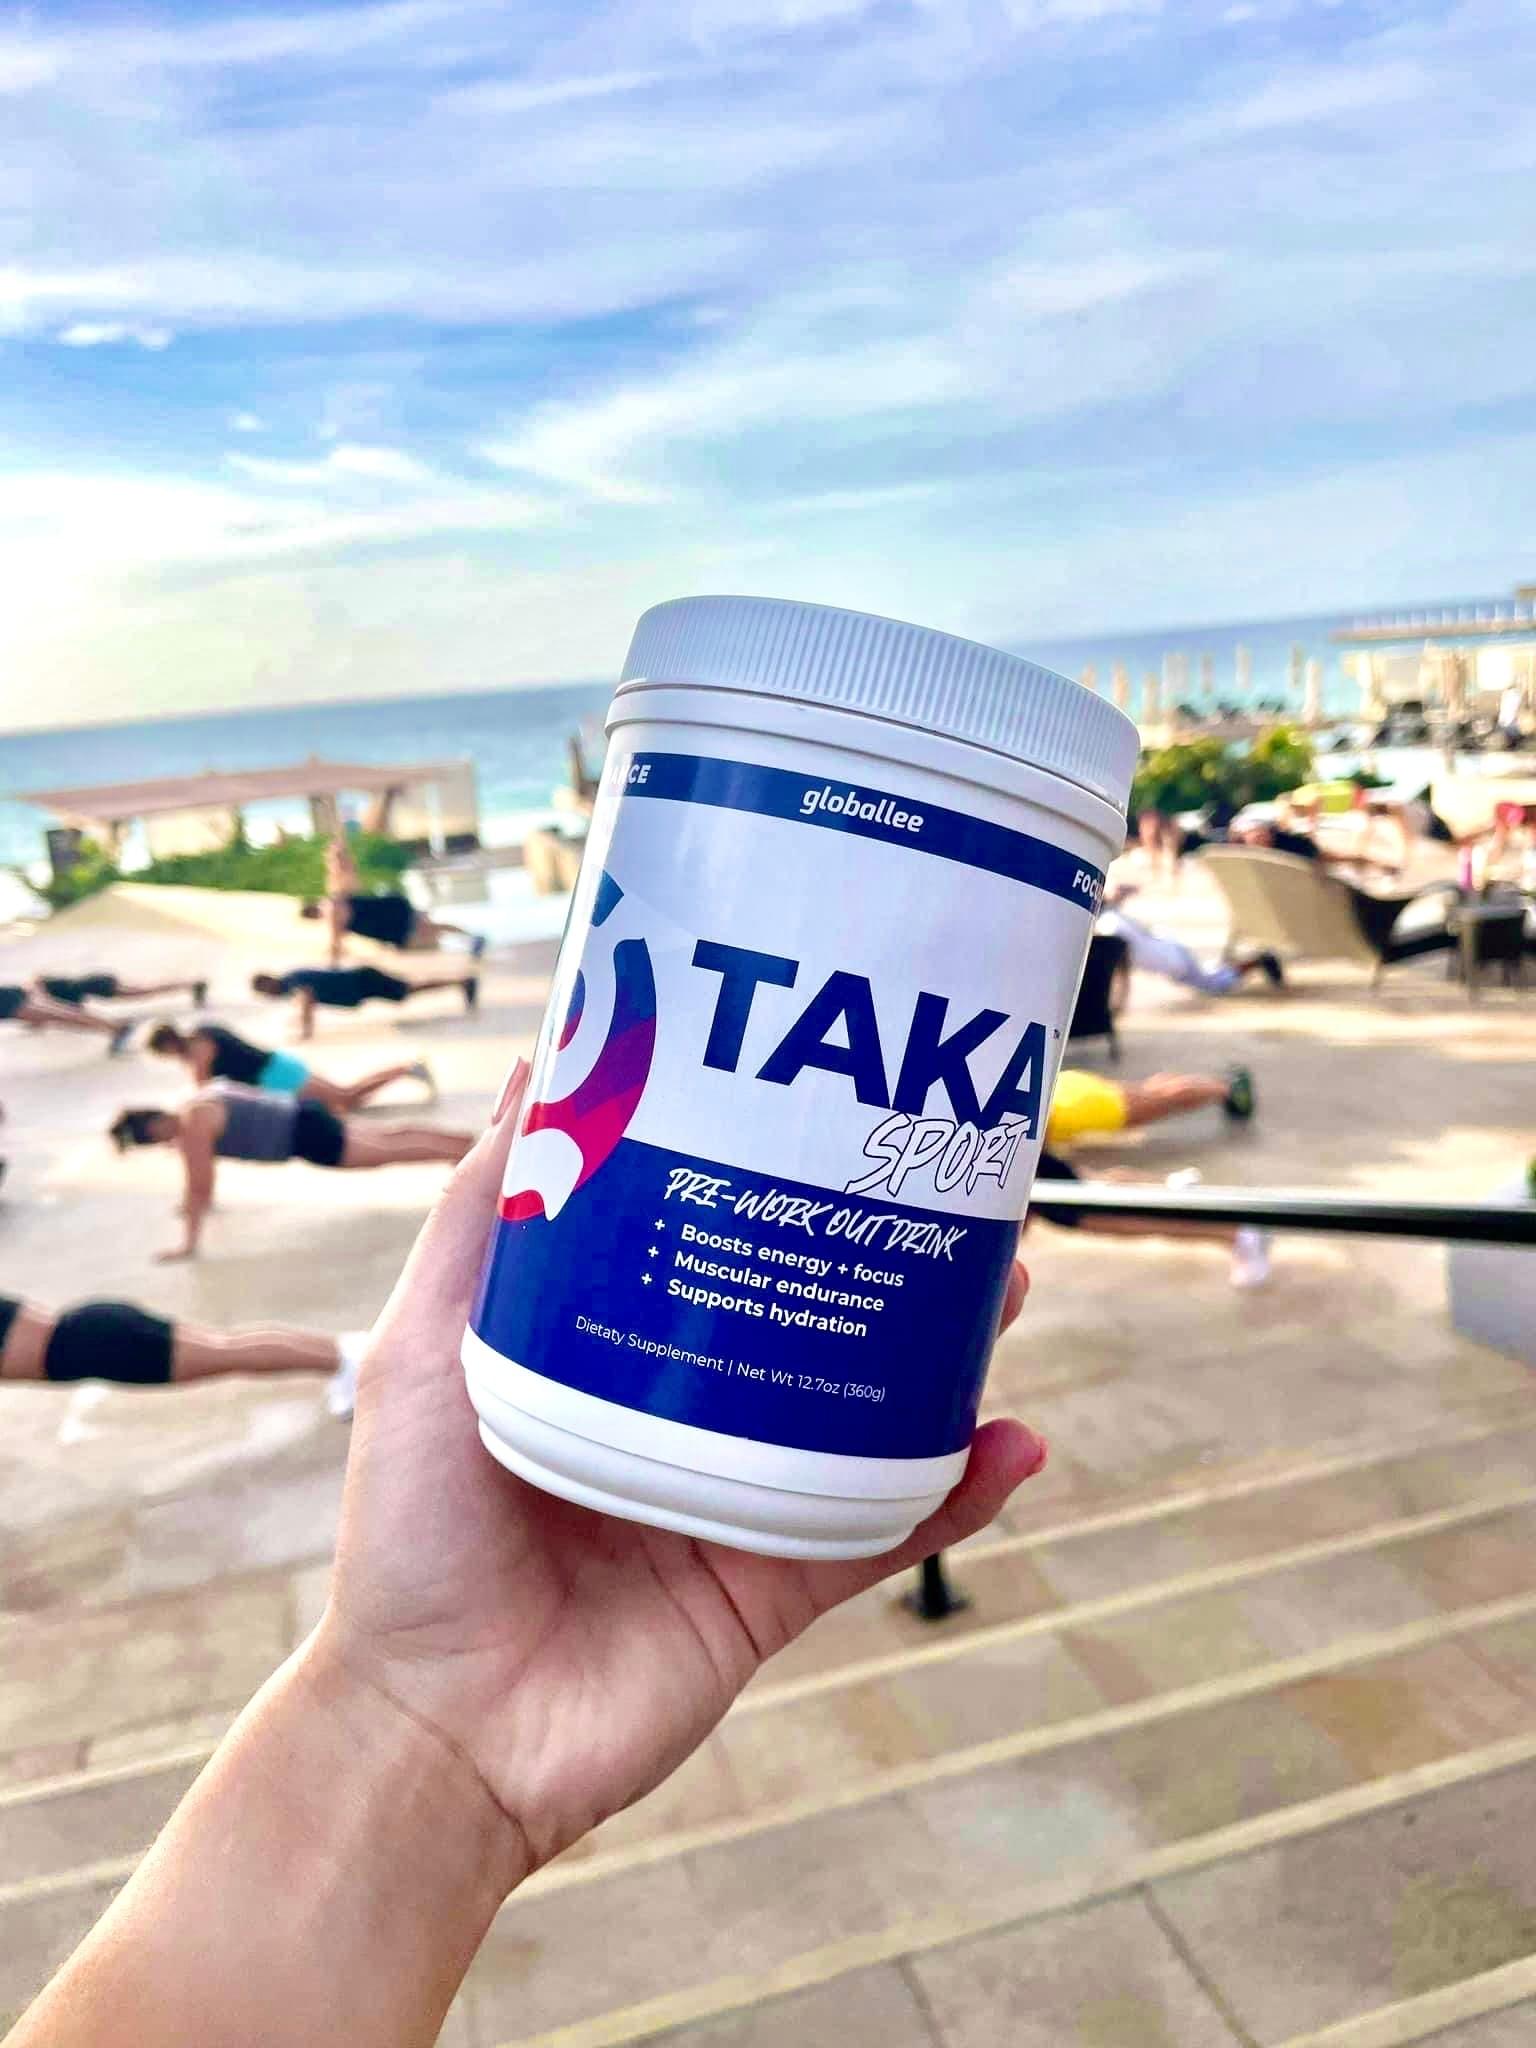 taka sport, taka sport tub, taka sport drink, taka sport canister